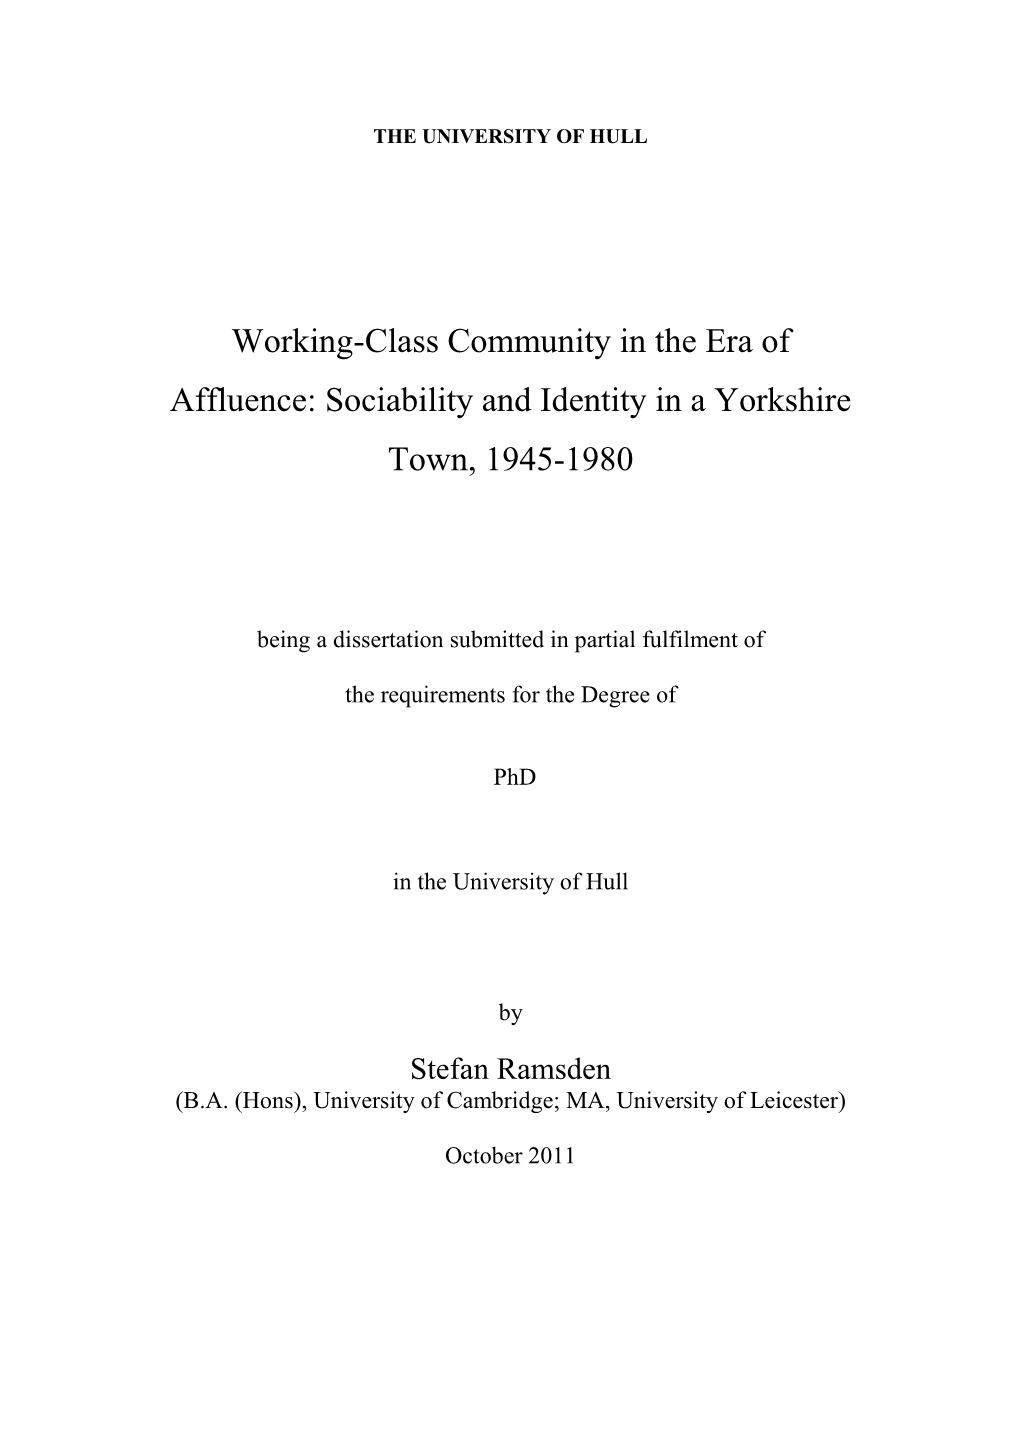 Working-Class Community in the Era of Affluence: Sociability and Identity in a Yorkshire Town, 1945-1980